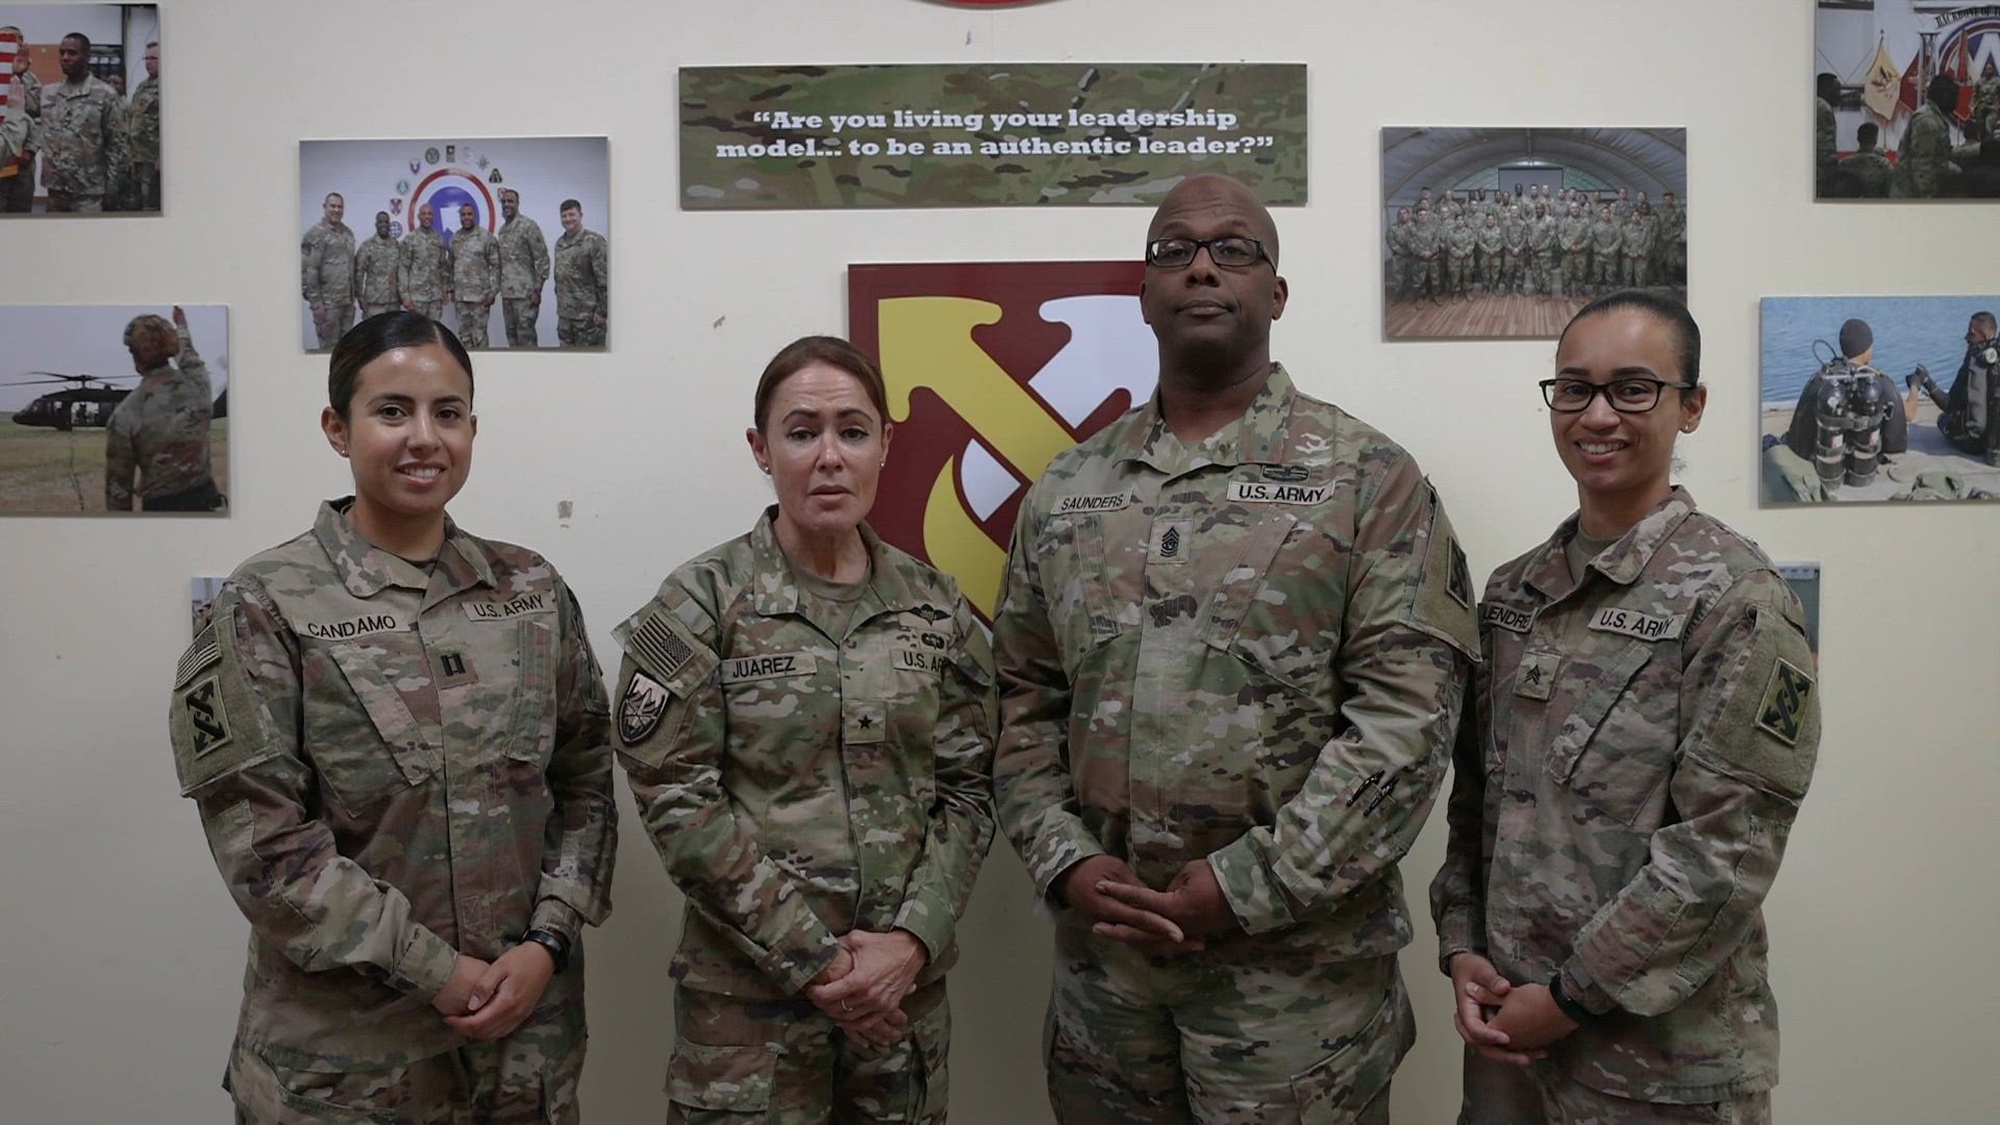 U.S. Army Reserve Brig. Gen. Maria Juarez, commanding general of 143d Expeditionary Sustainment Command (ESC), and Command Sgt. Maj. Ricardo Saunders, 143d ESC, wish the U.S. Army Reserve a happy 115th birthday. (U.S. Army video by Spc. Cecilia Soriano)